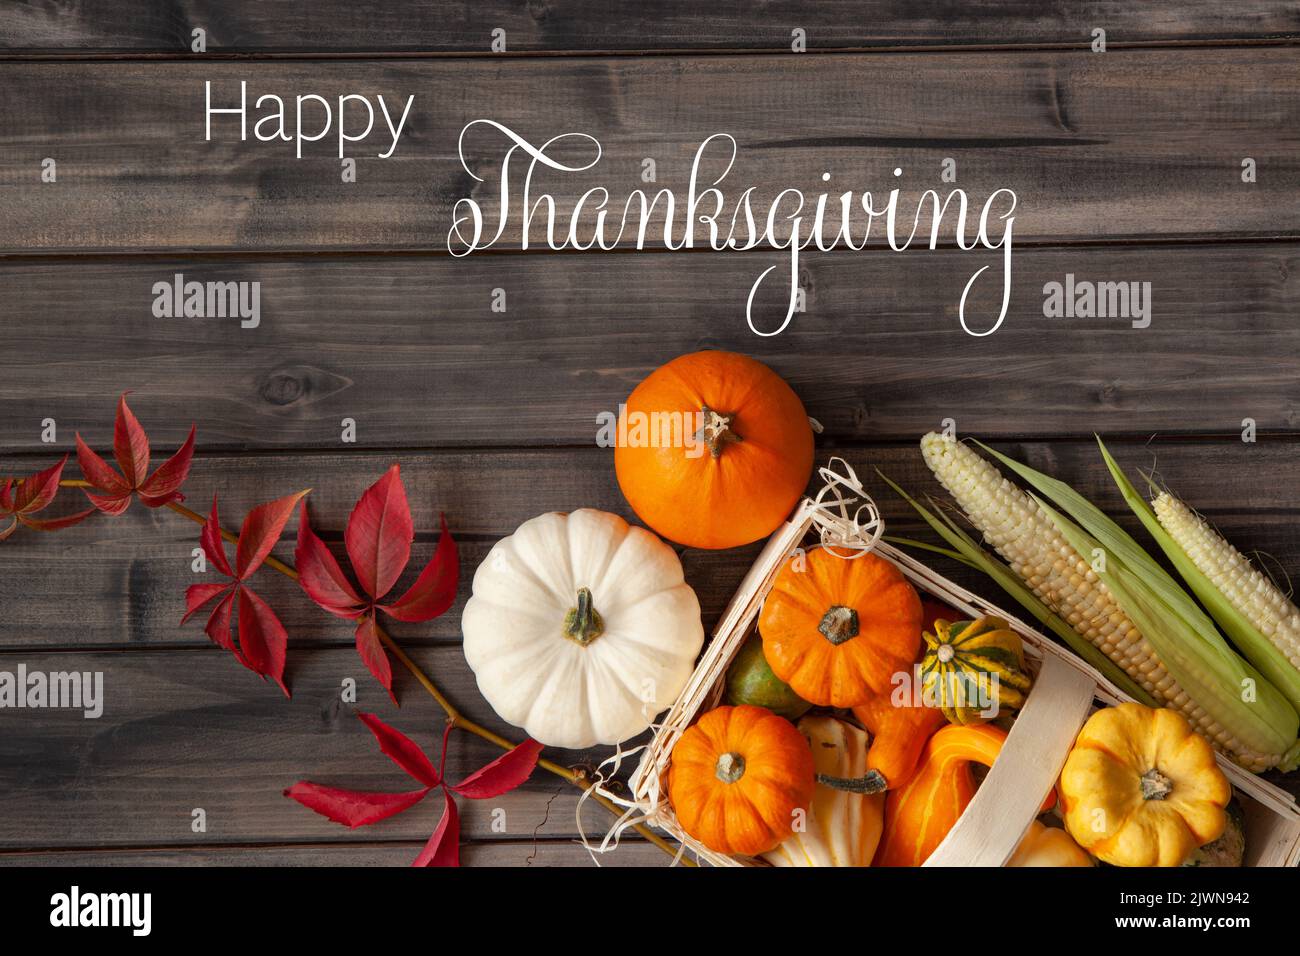 Happy Thanksgiving. Autumn decoration with pumpkins on wooden background Stock Photo